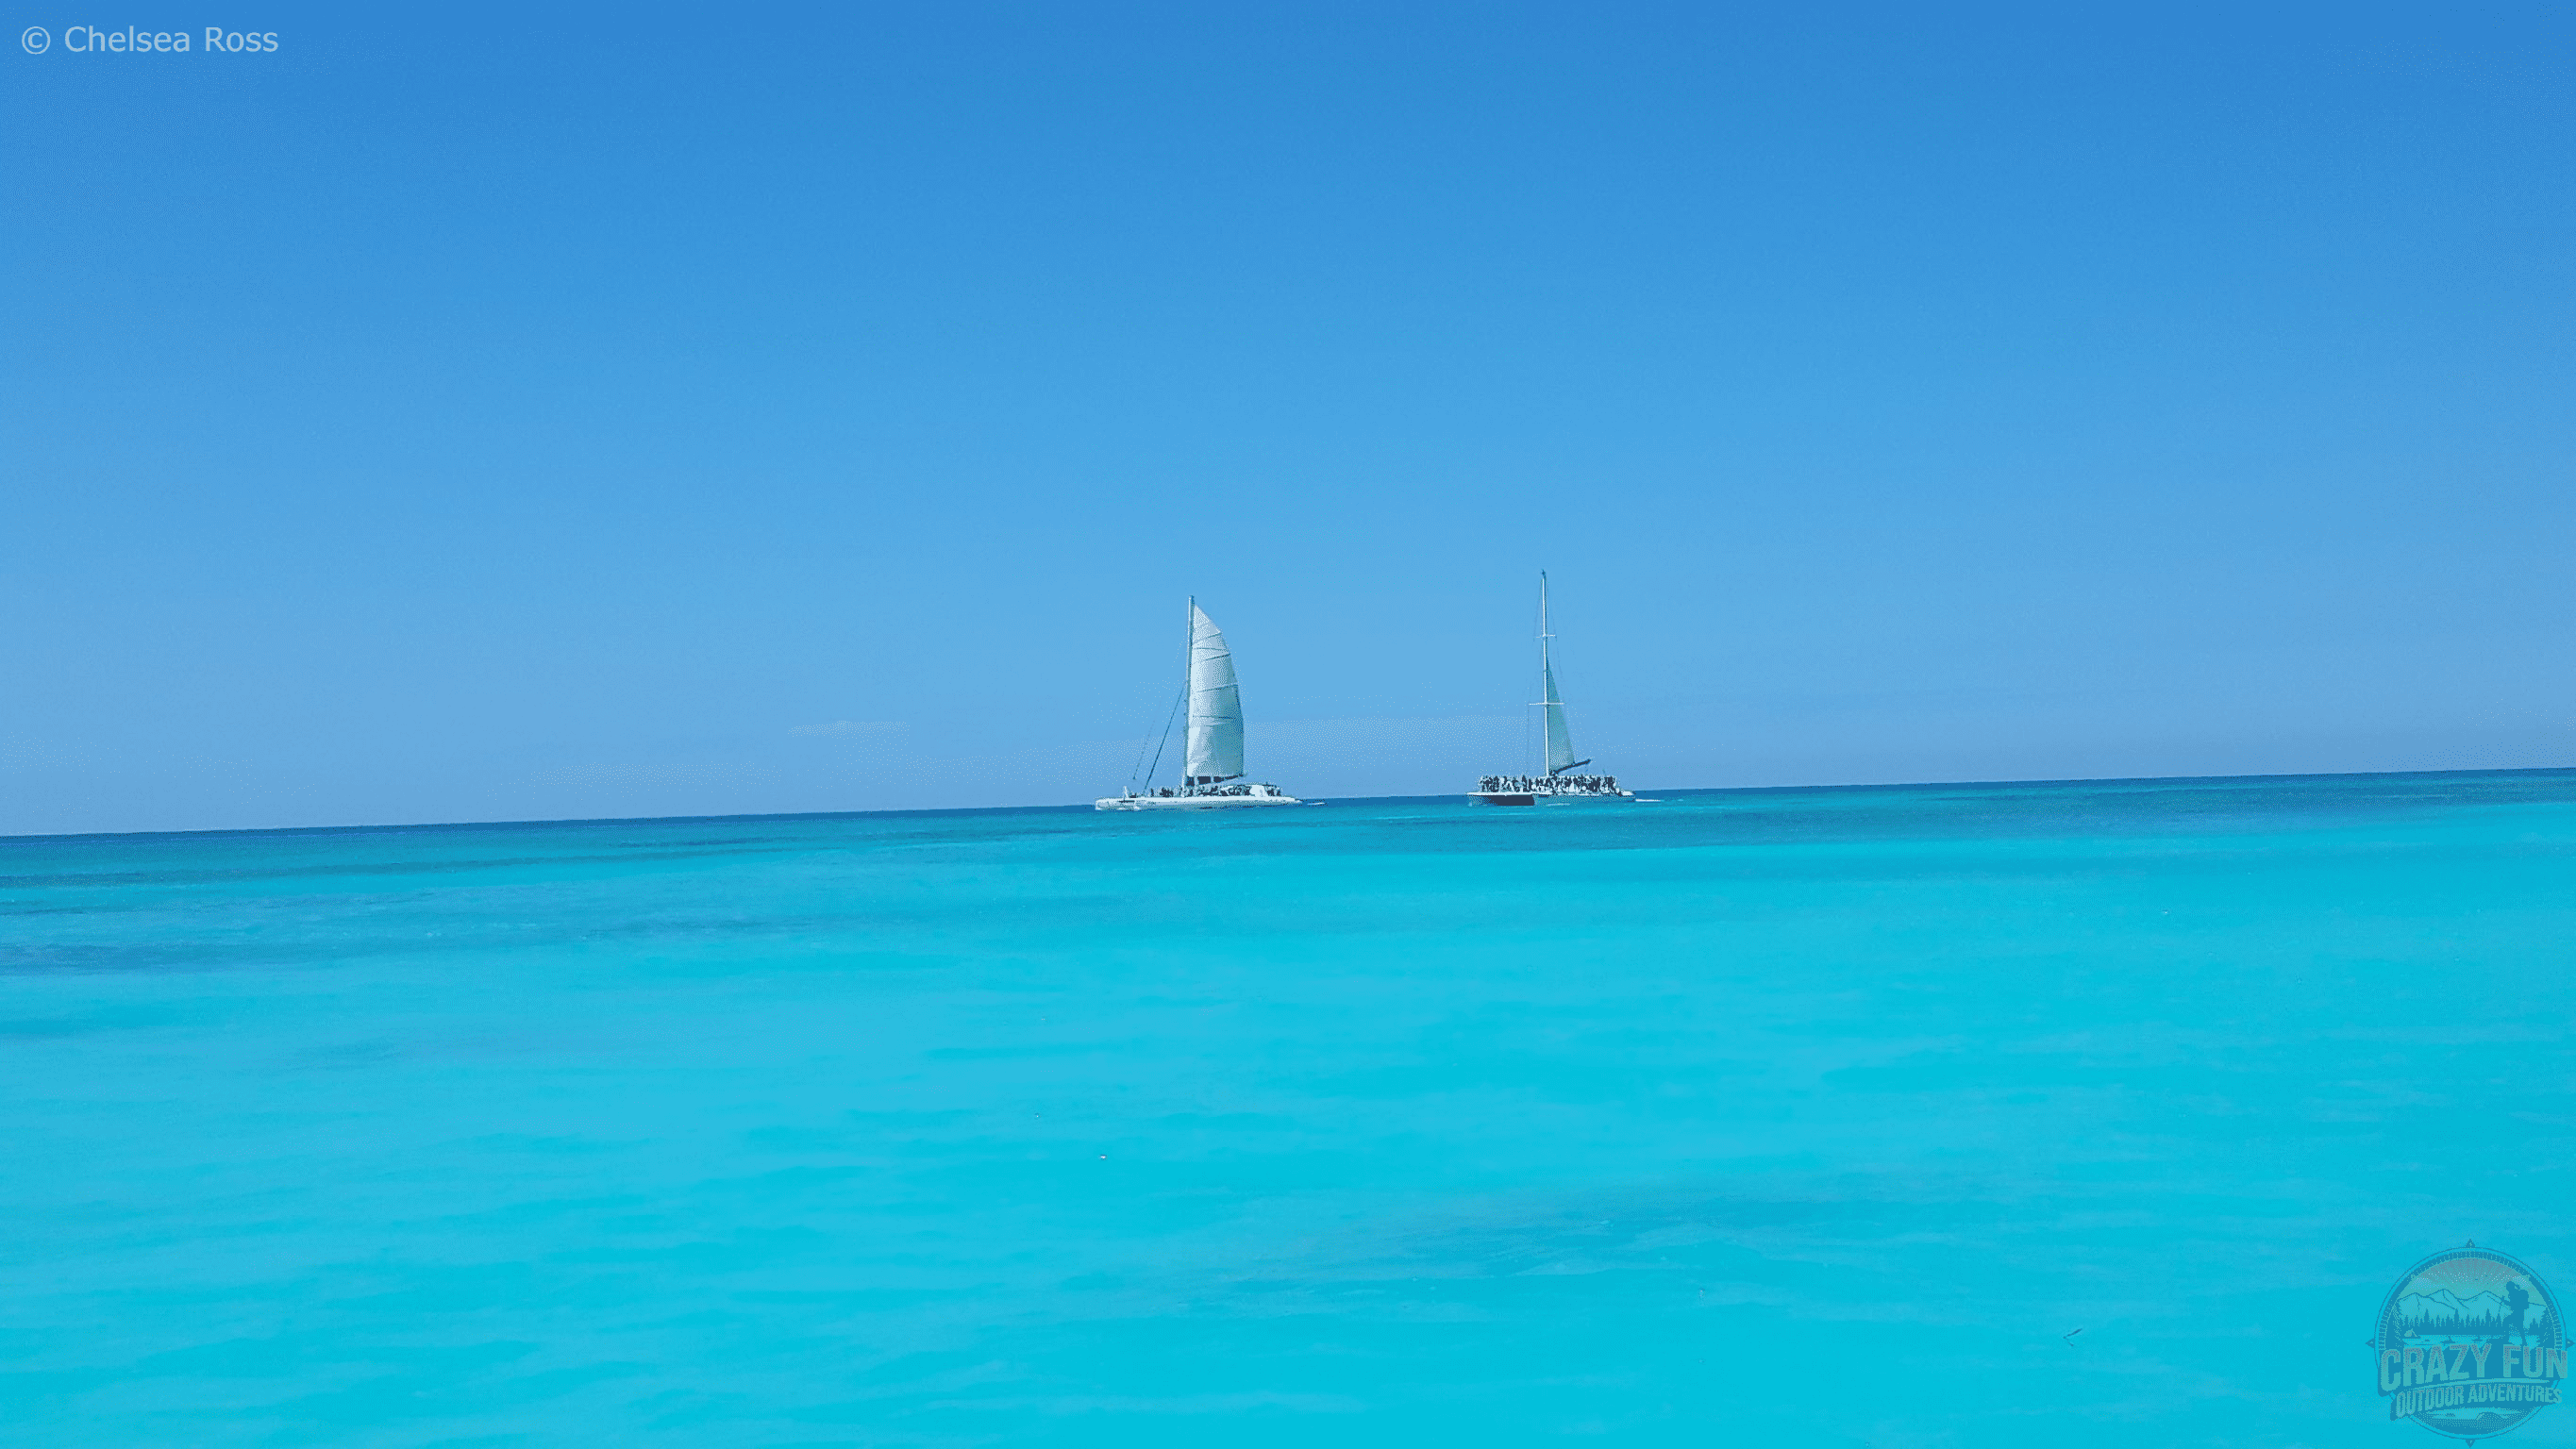 The blue turquoise ocean with two other catamarans in the distance.